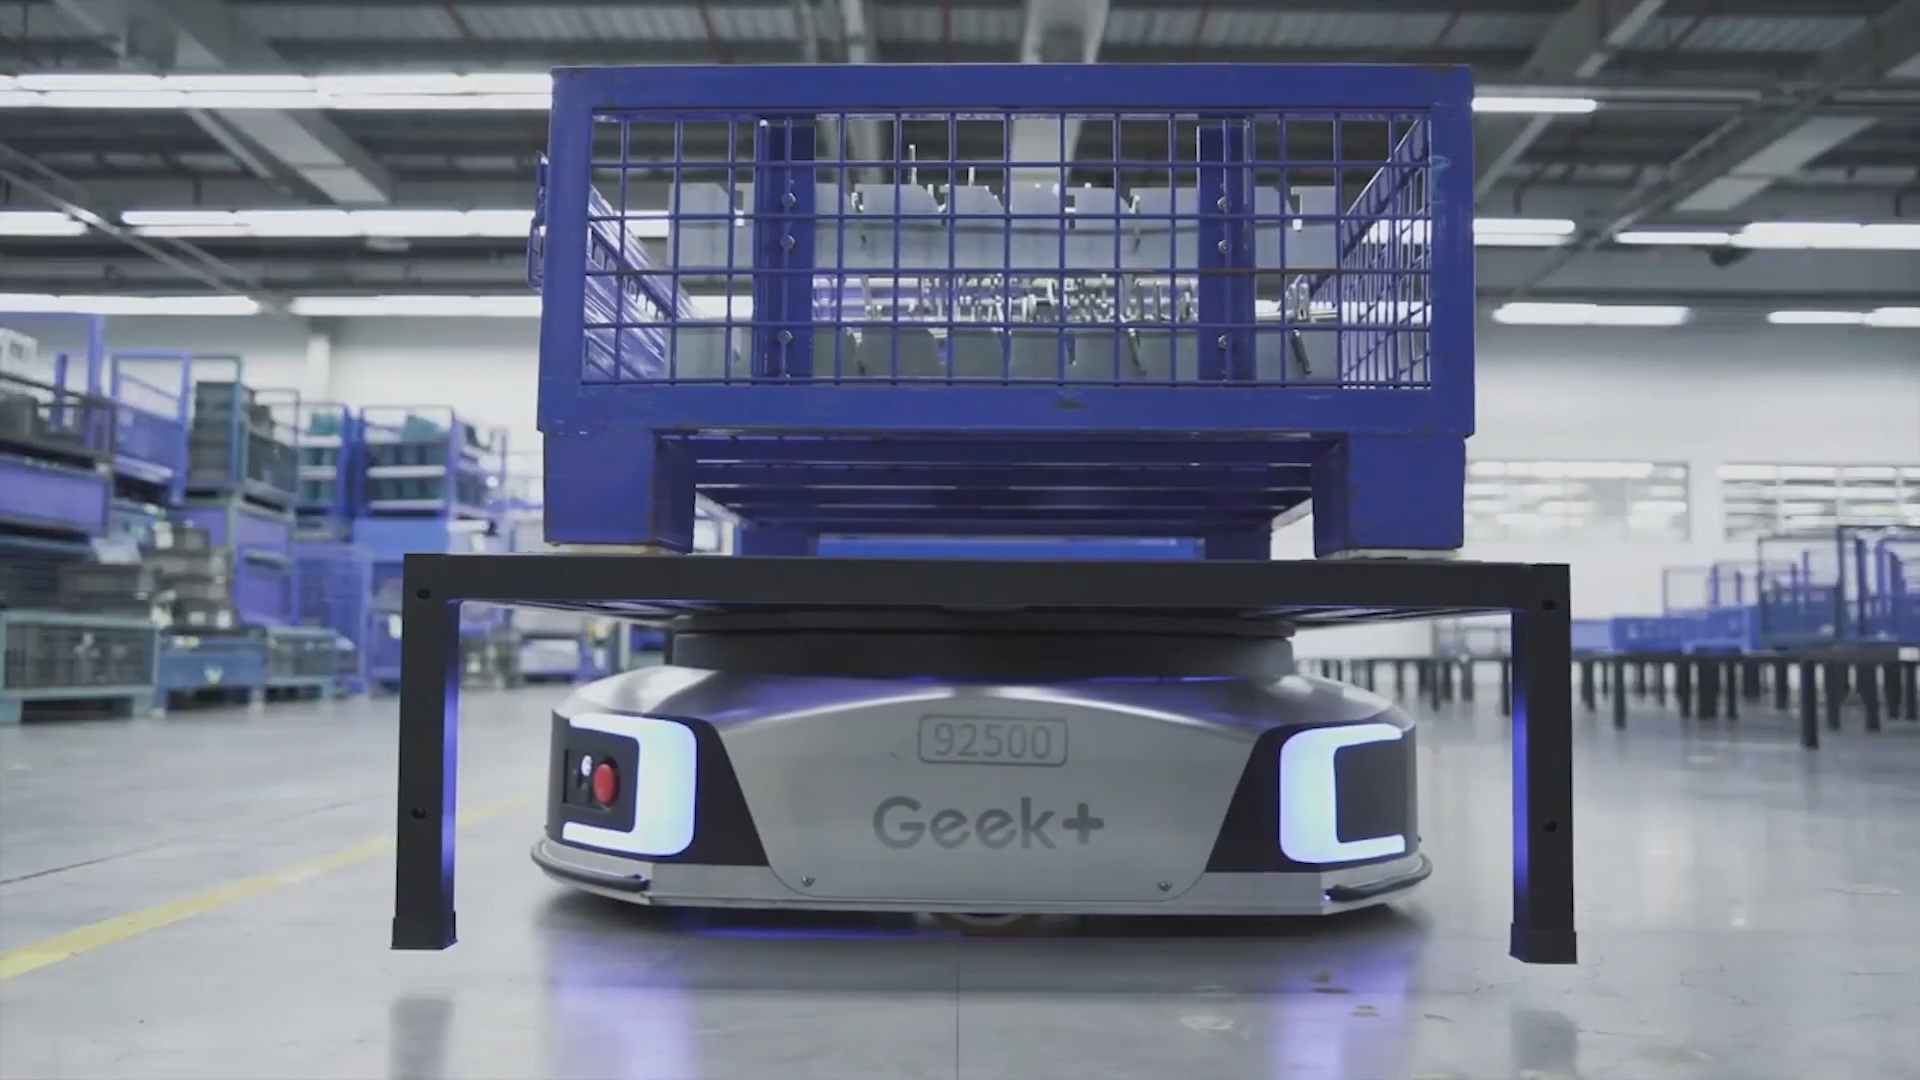 Geek+ has developed a range of autonomous mobile robots that can do picking, sorting, moving and lifting functions in warehouses and other types of logistics operations.